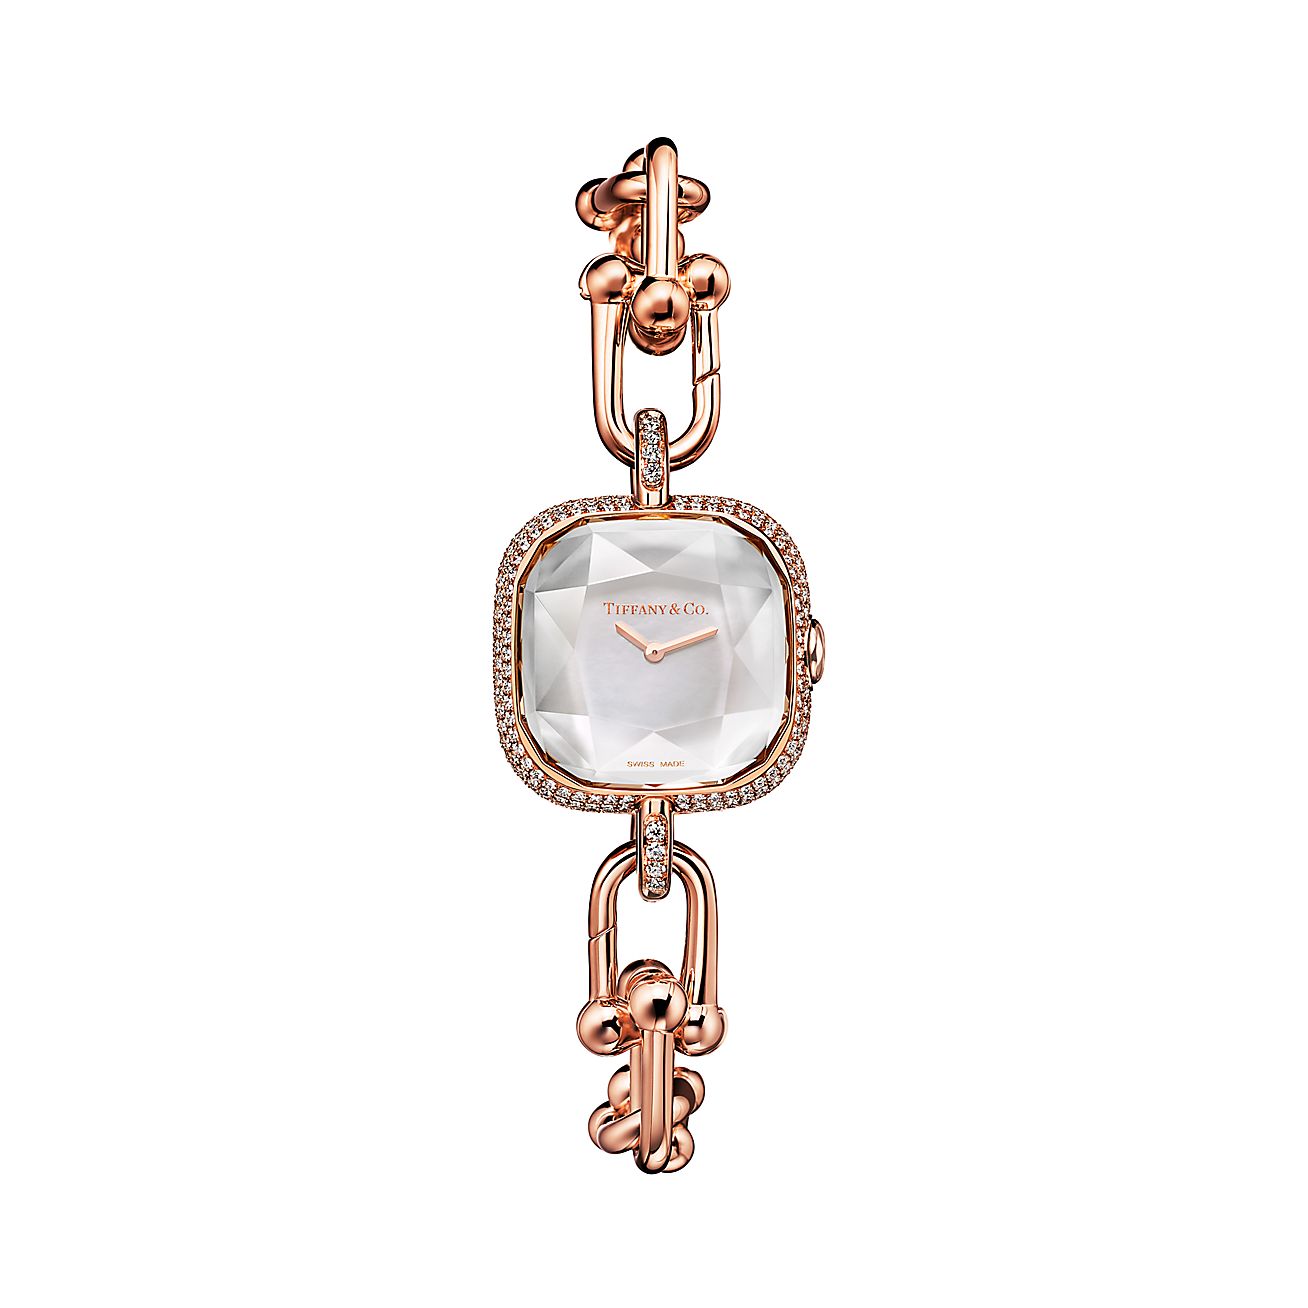 18K White and Rose Gold Jewelry Watch with Sapphires and Diamonds